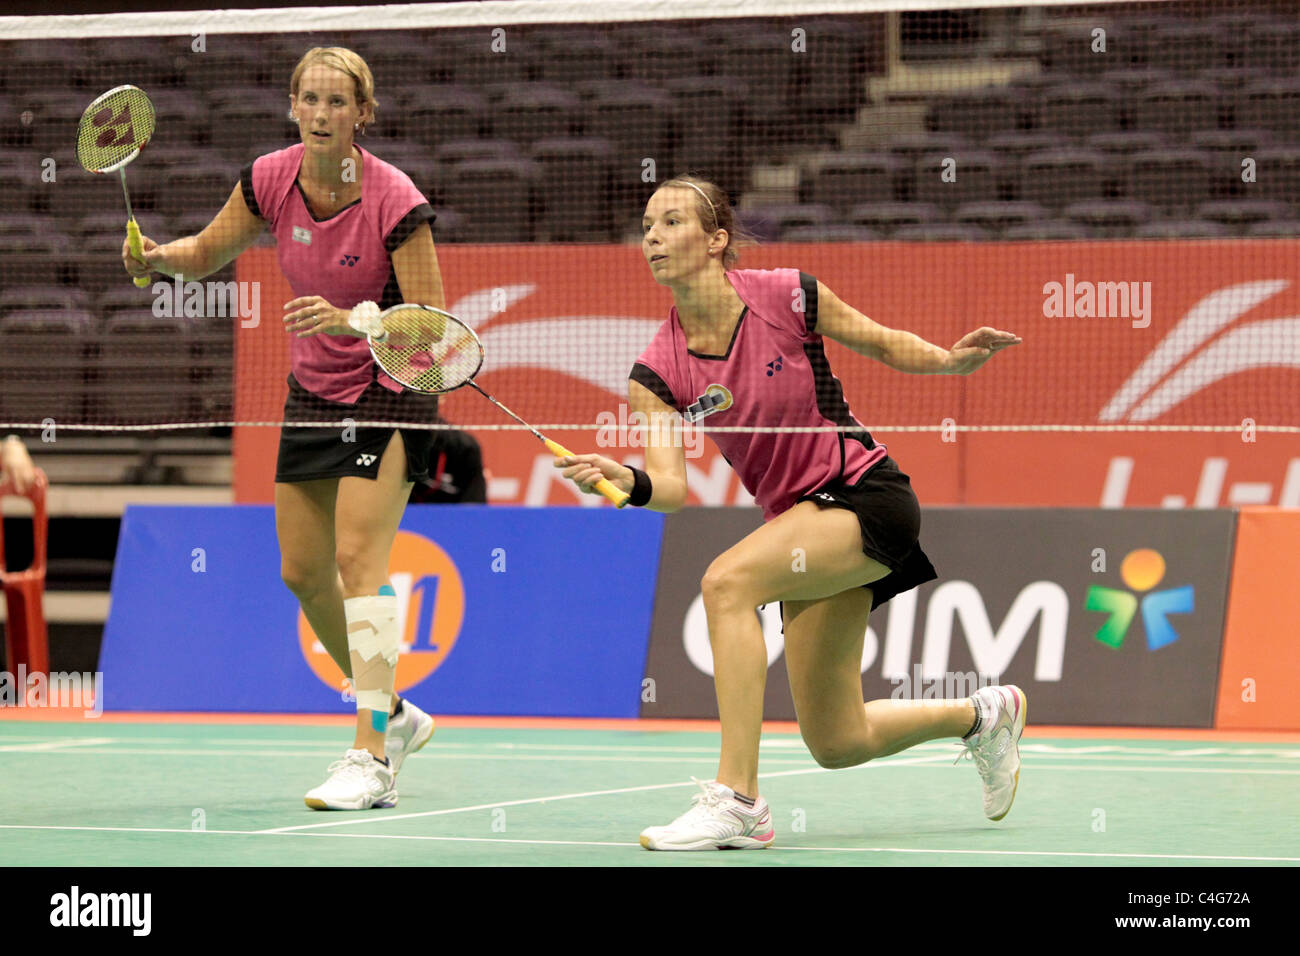 Birgit Michels and Sandra Marinello of Germany during the Women's Doubles Round 1 of the Li-Ning Singapore Open 2011. Stock Photo